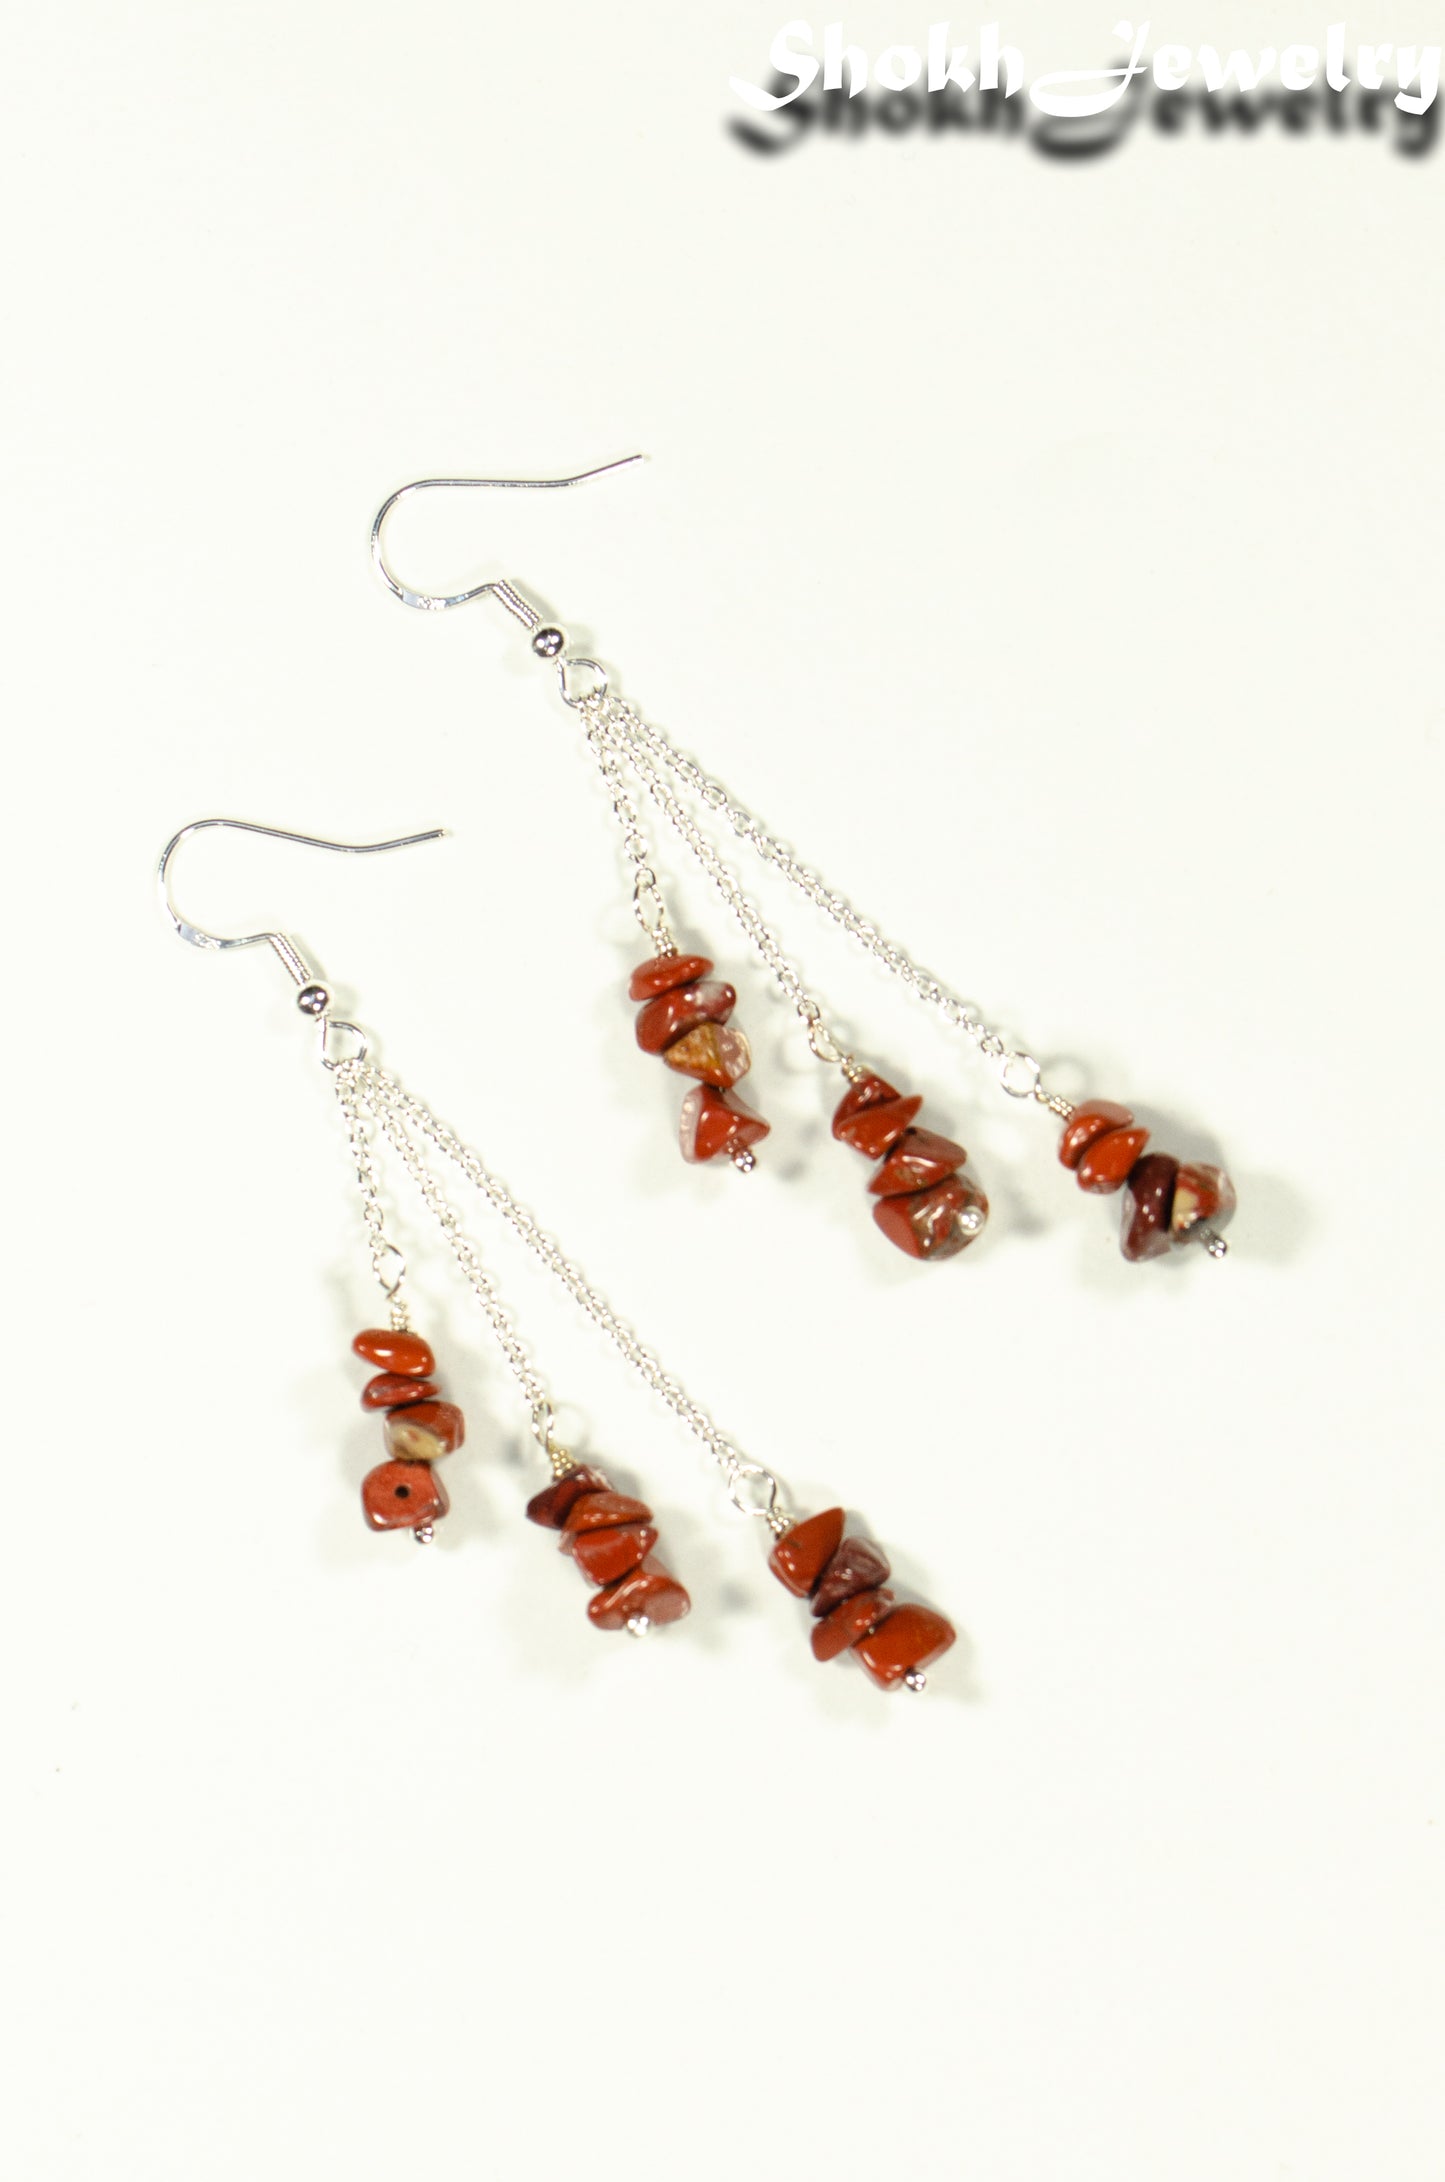 Top view of Long Silver Plated Chain and Red Jasper Chip Earrings.